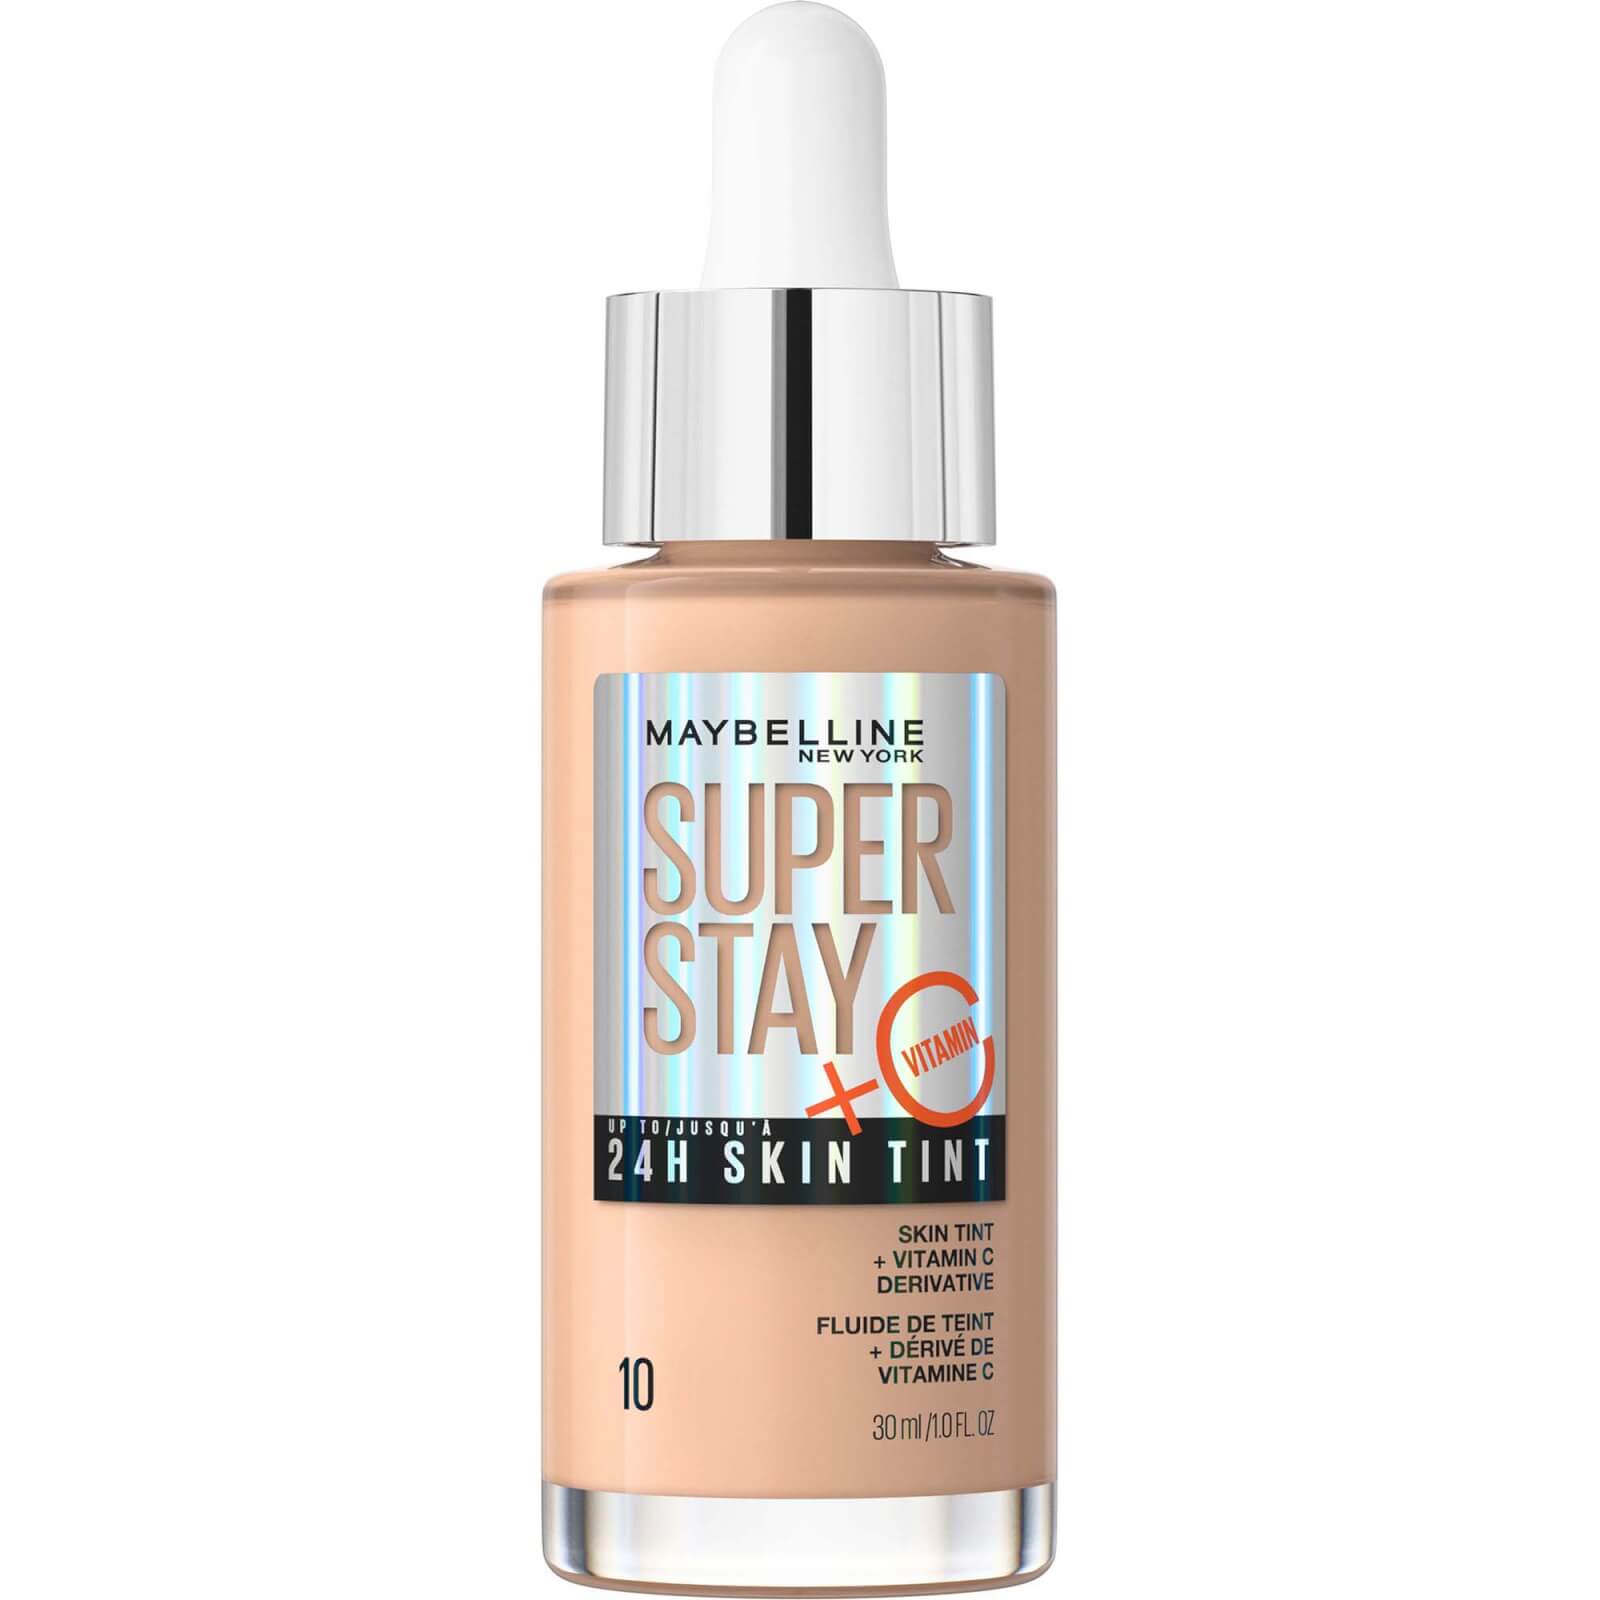 Maybelline Super Stay Up To 24h Skin Tint Foundation + Vitamin C 30ml (various Shades) - 10 In Neutral